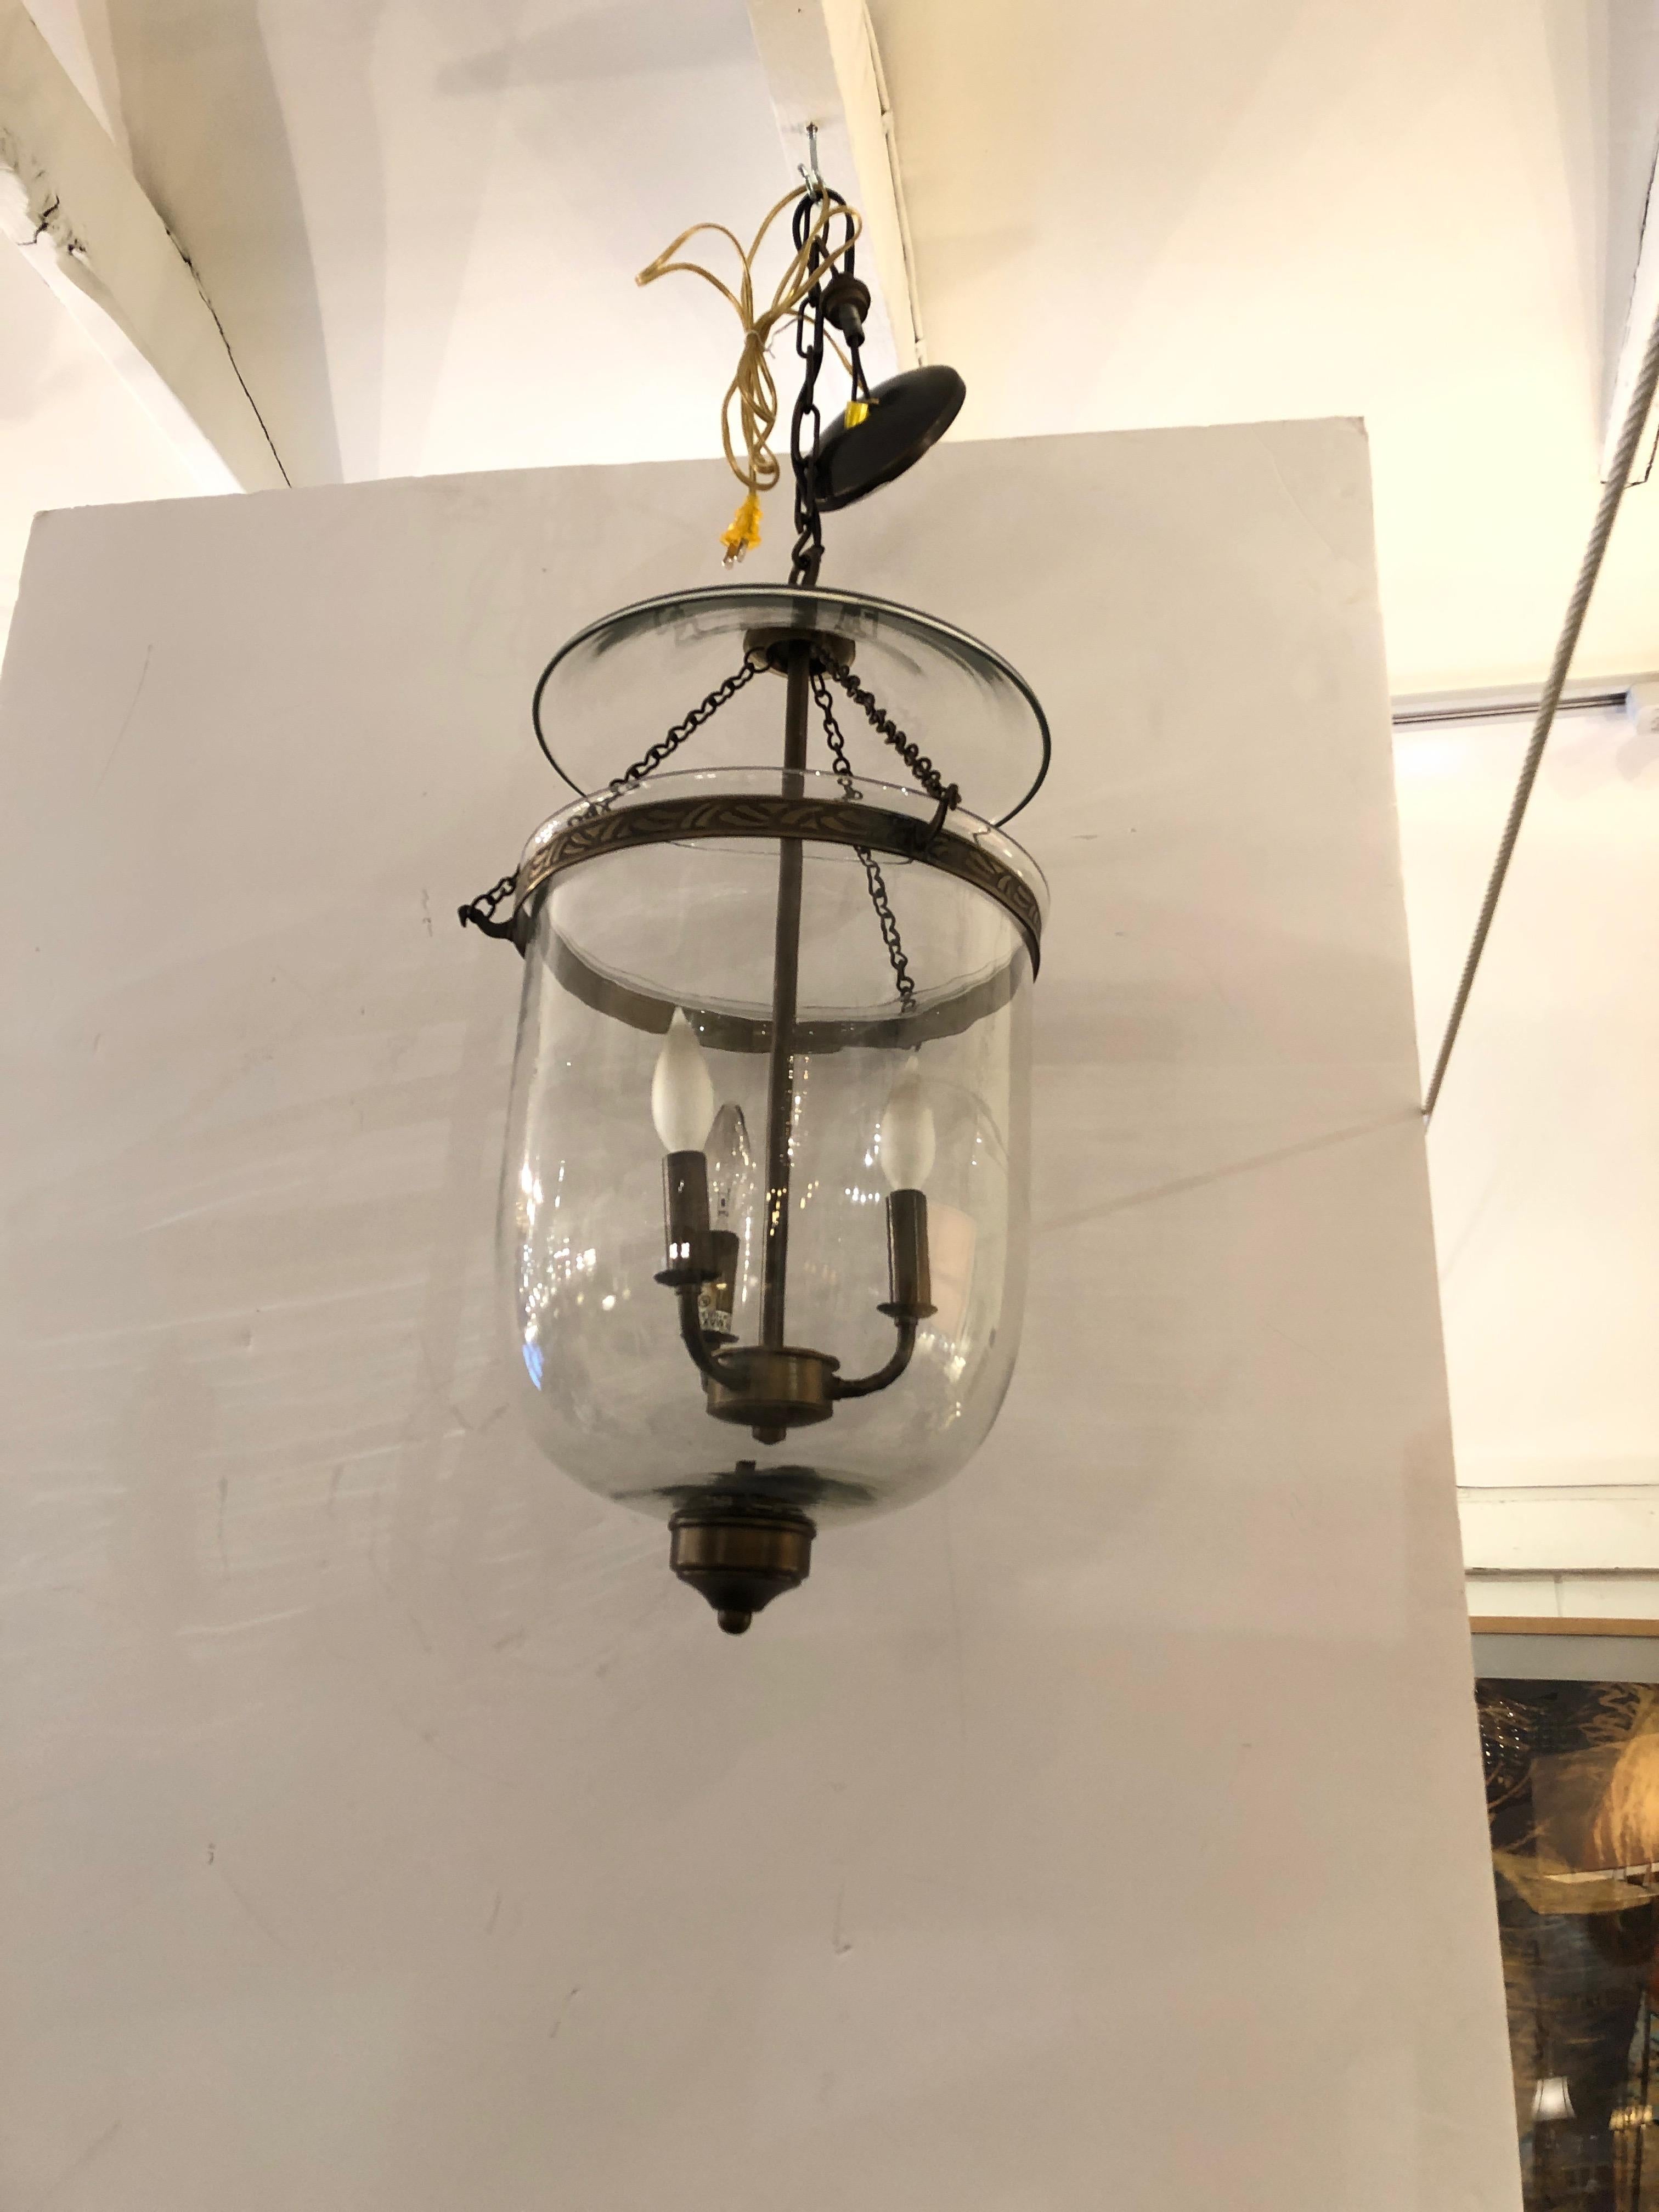 A beautiful and unusually large bell glass lantern having rich bronze finish brass and original ceiling cap. 3 arms, 25 watt each

Note: Pair available for $2900.